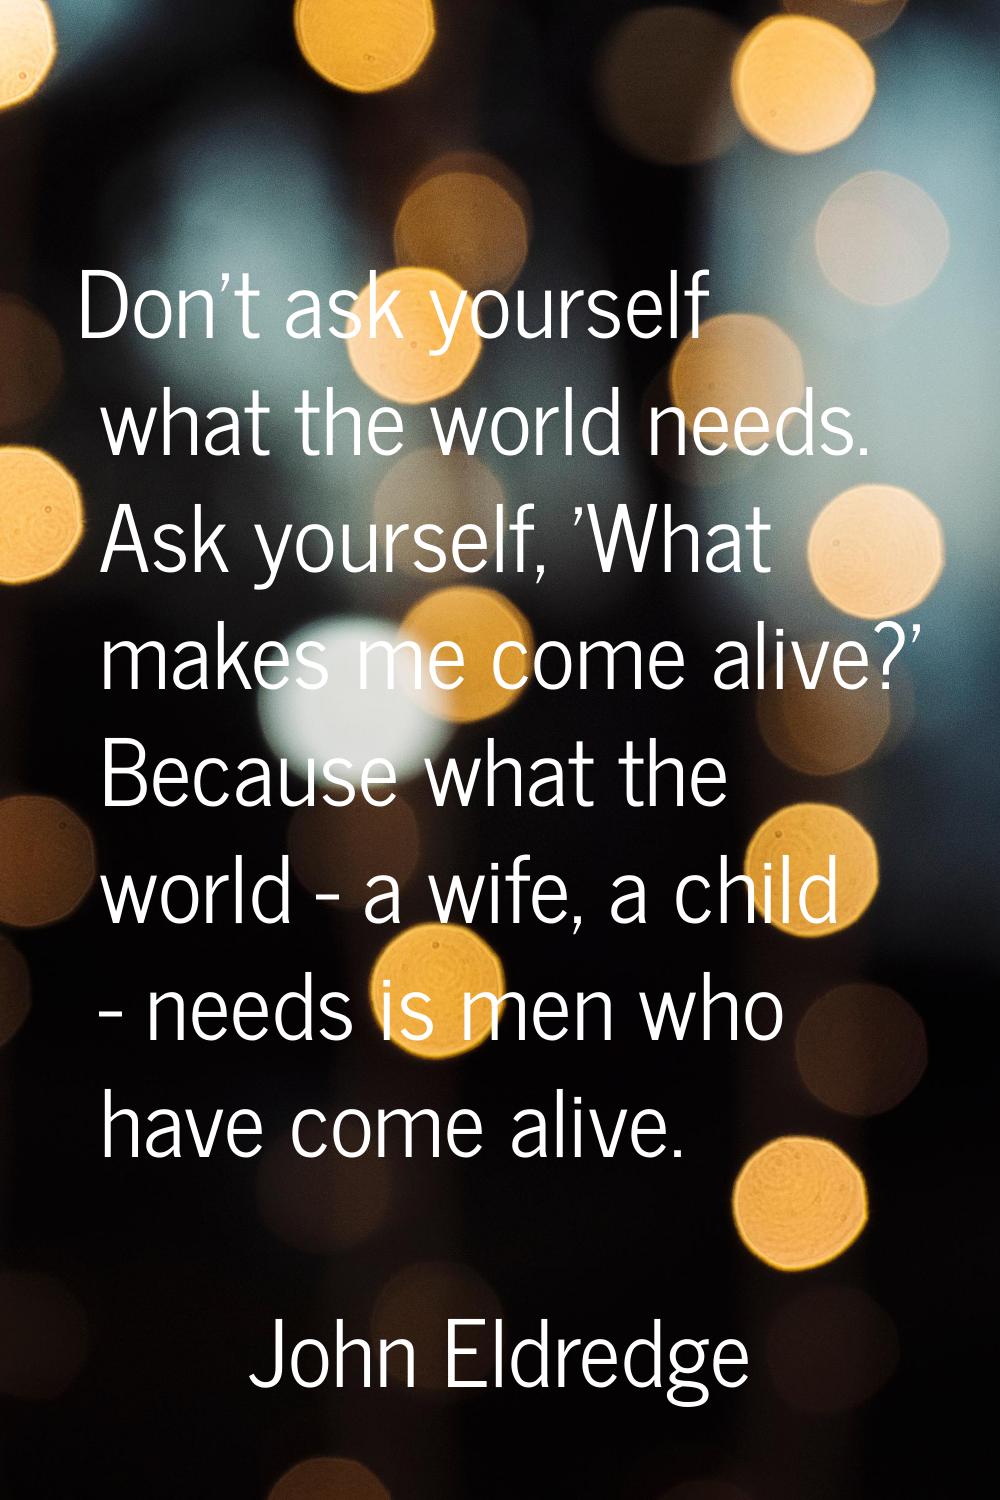 Don't ask yourself what the world needs. Ask yourself, 'What makes me come alive?' Because what the